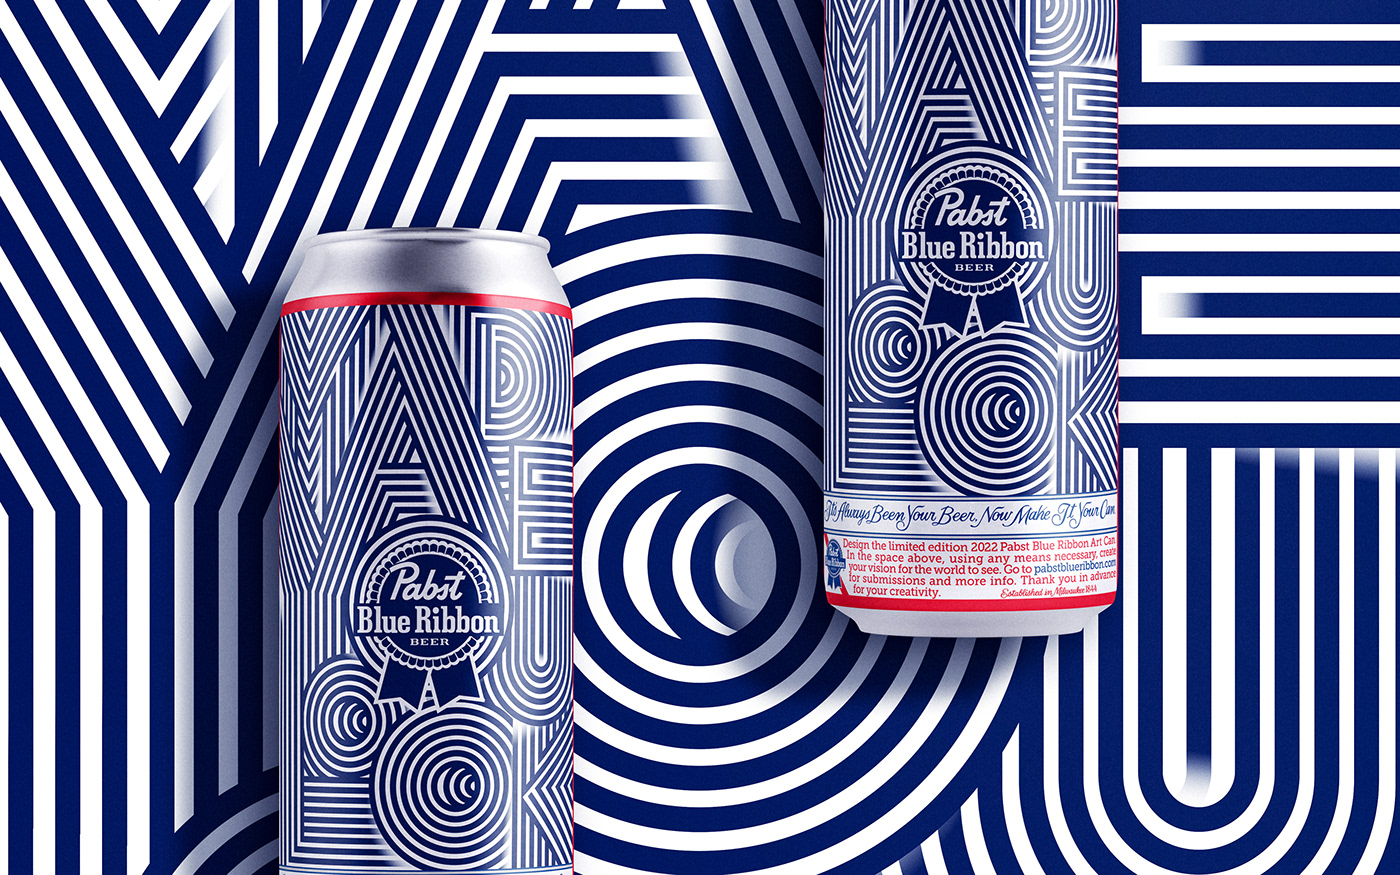 Pabst Blue Ribbon’s can art design for contest on Talenthouse